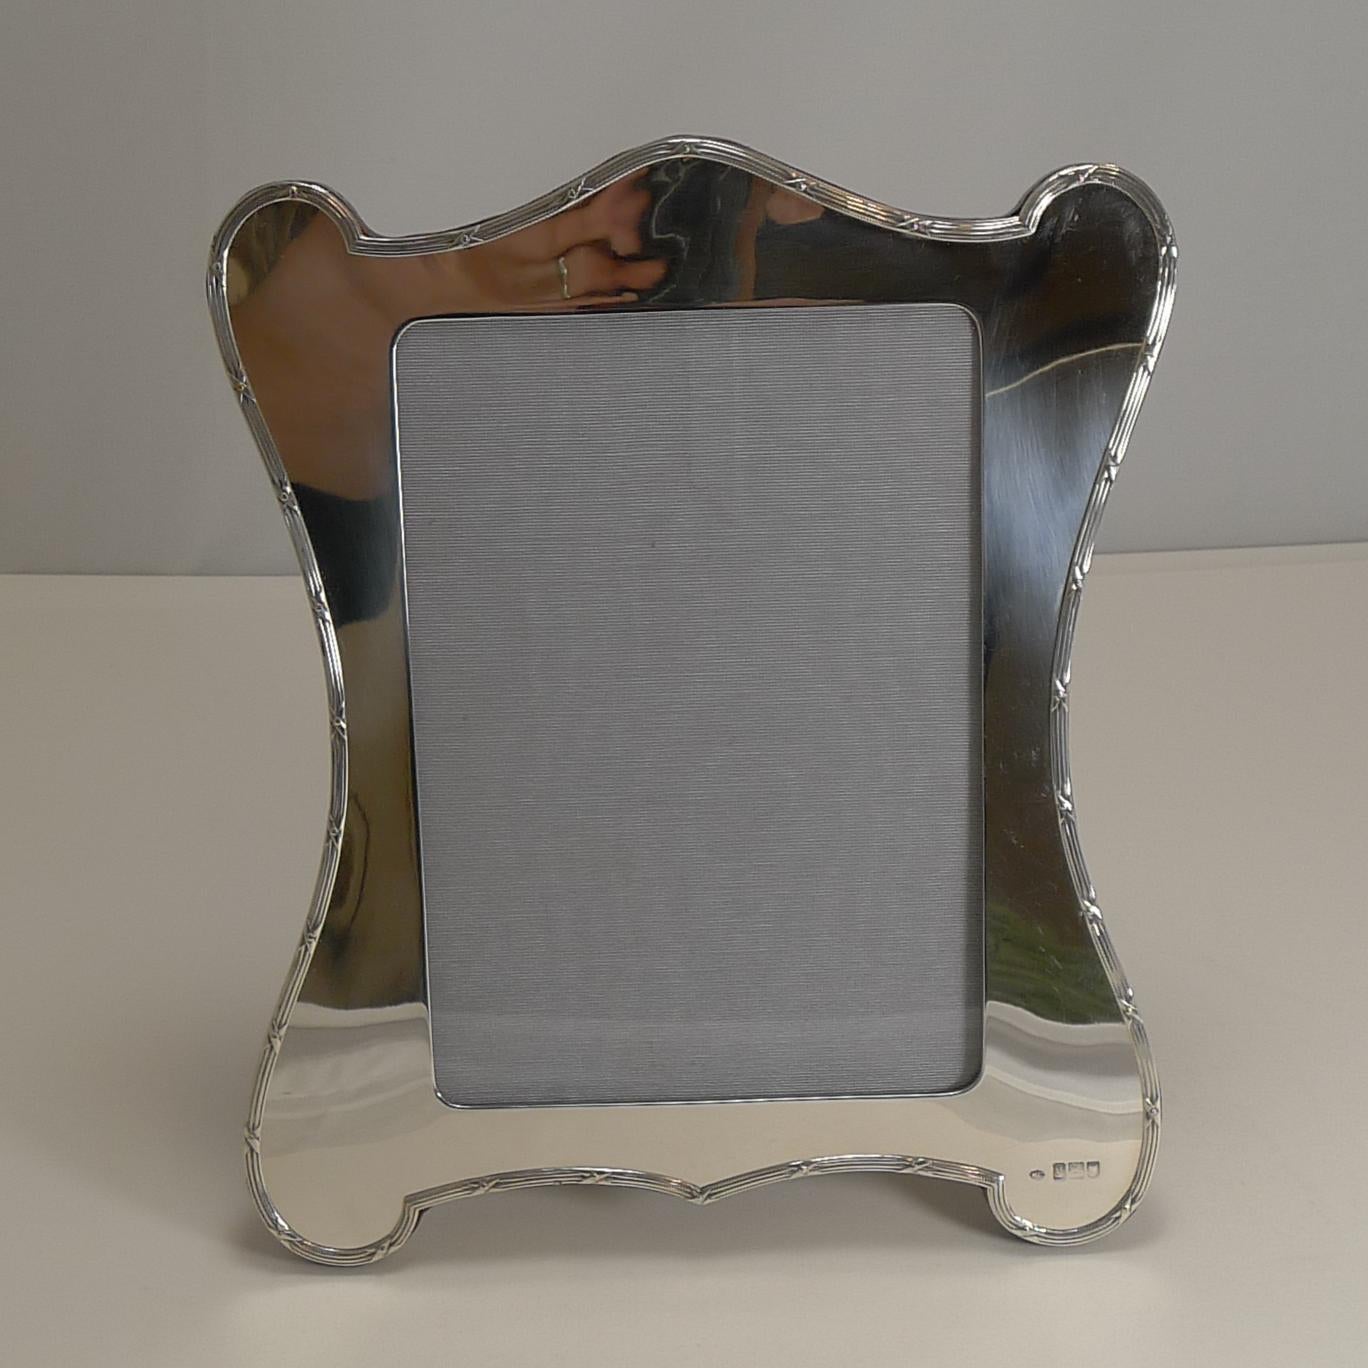 A fabulous large Edwardian photograph frame, wonderful quality and condition.

Made from English sterling silver, this shaped frame has an understated elegance with a simple ribbon and reed border showcasing the shape. The silver is fully